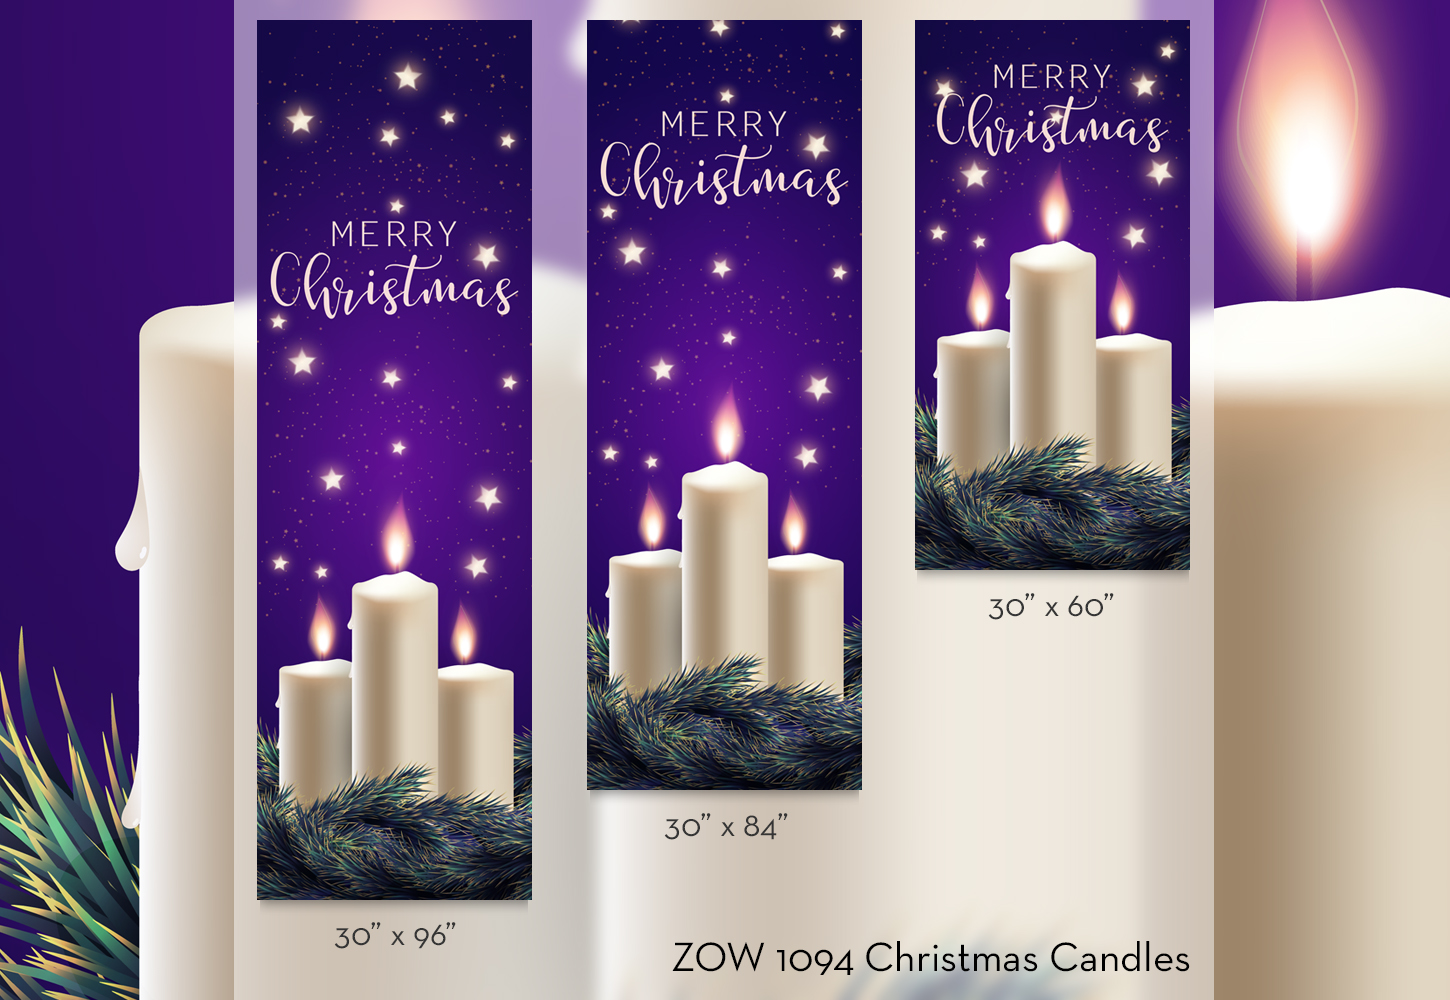 ZOW 1094 Christmas Candles